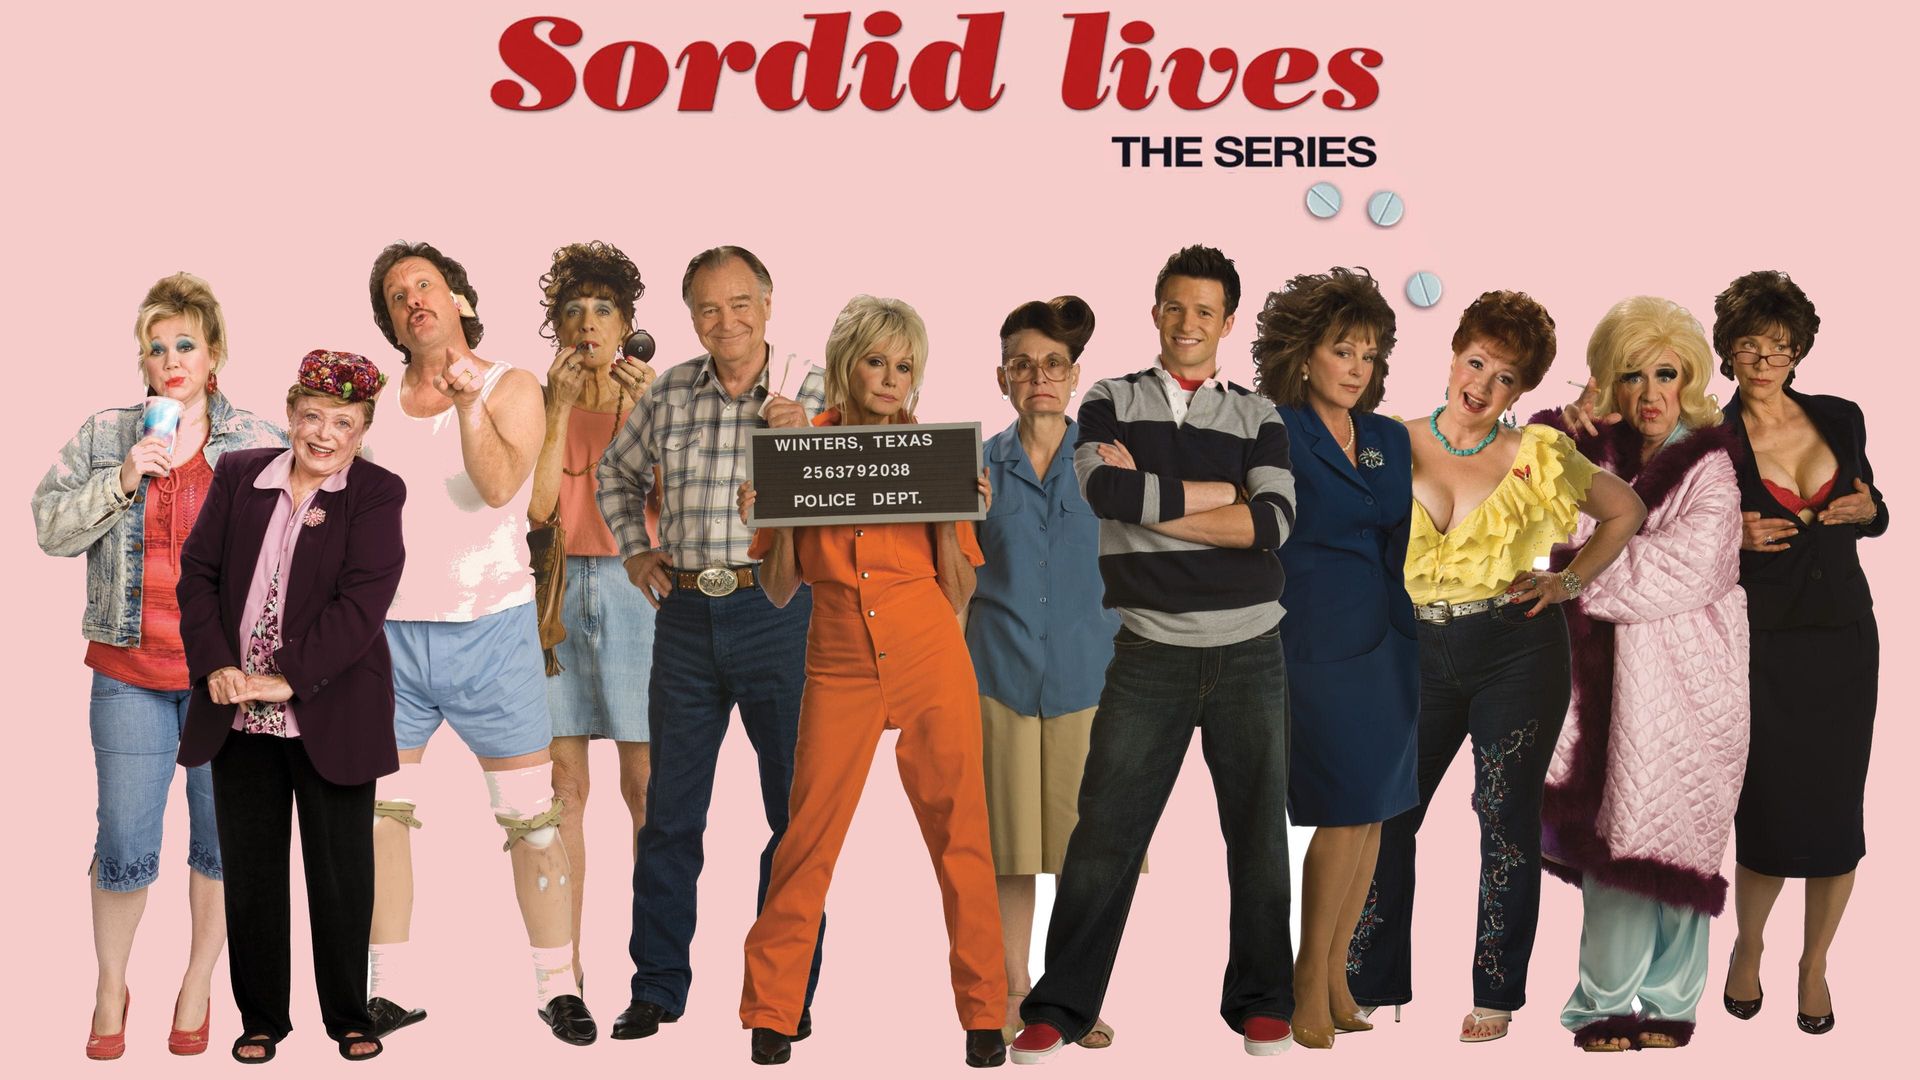 Sordid Lives: The Series background